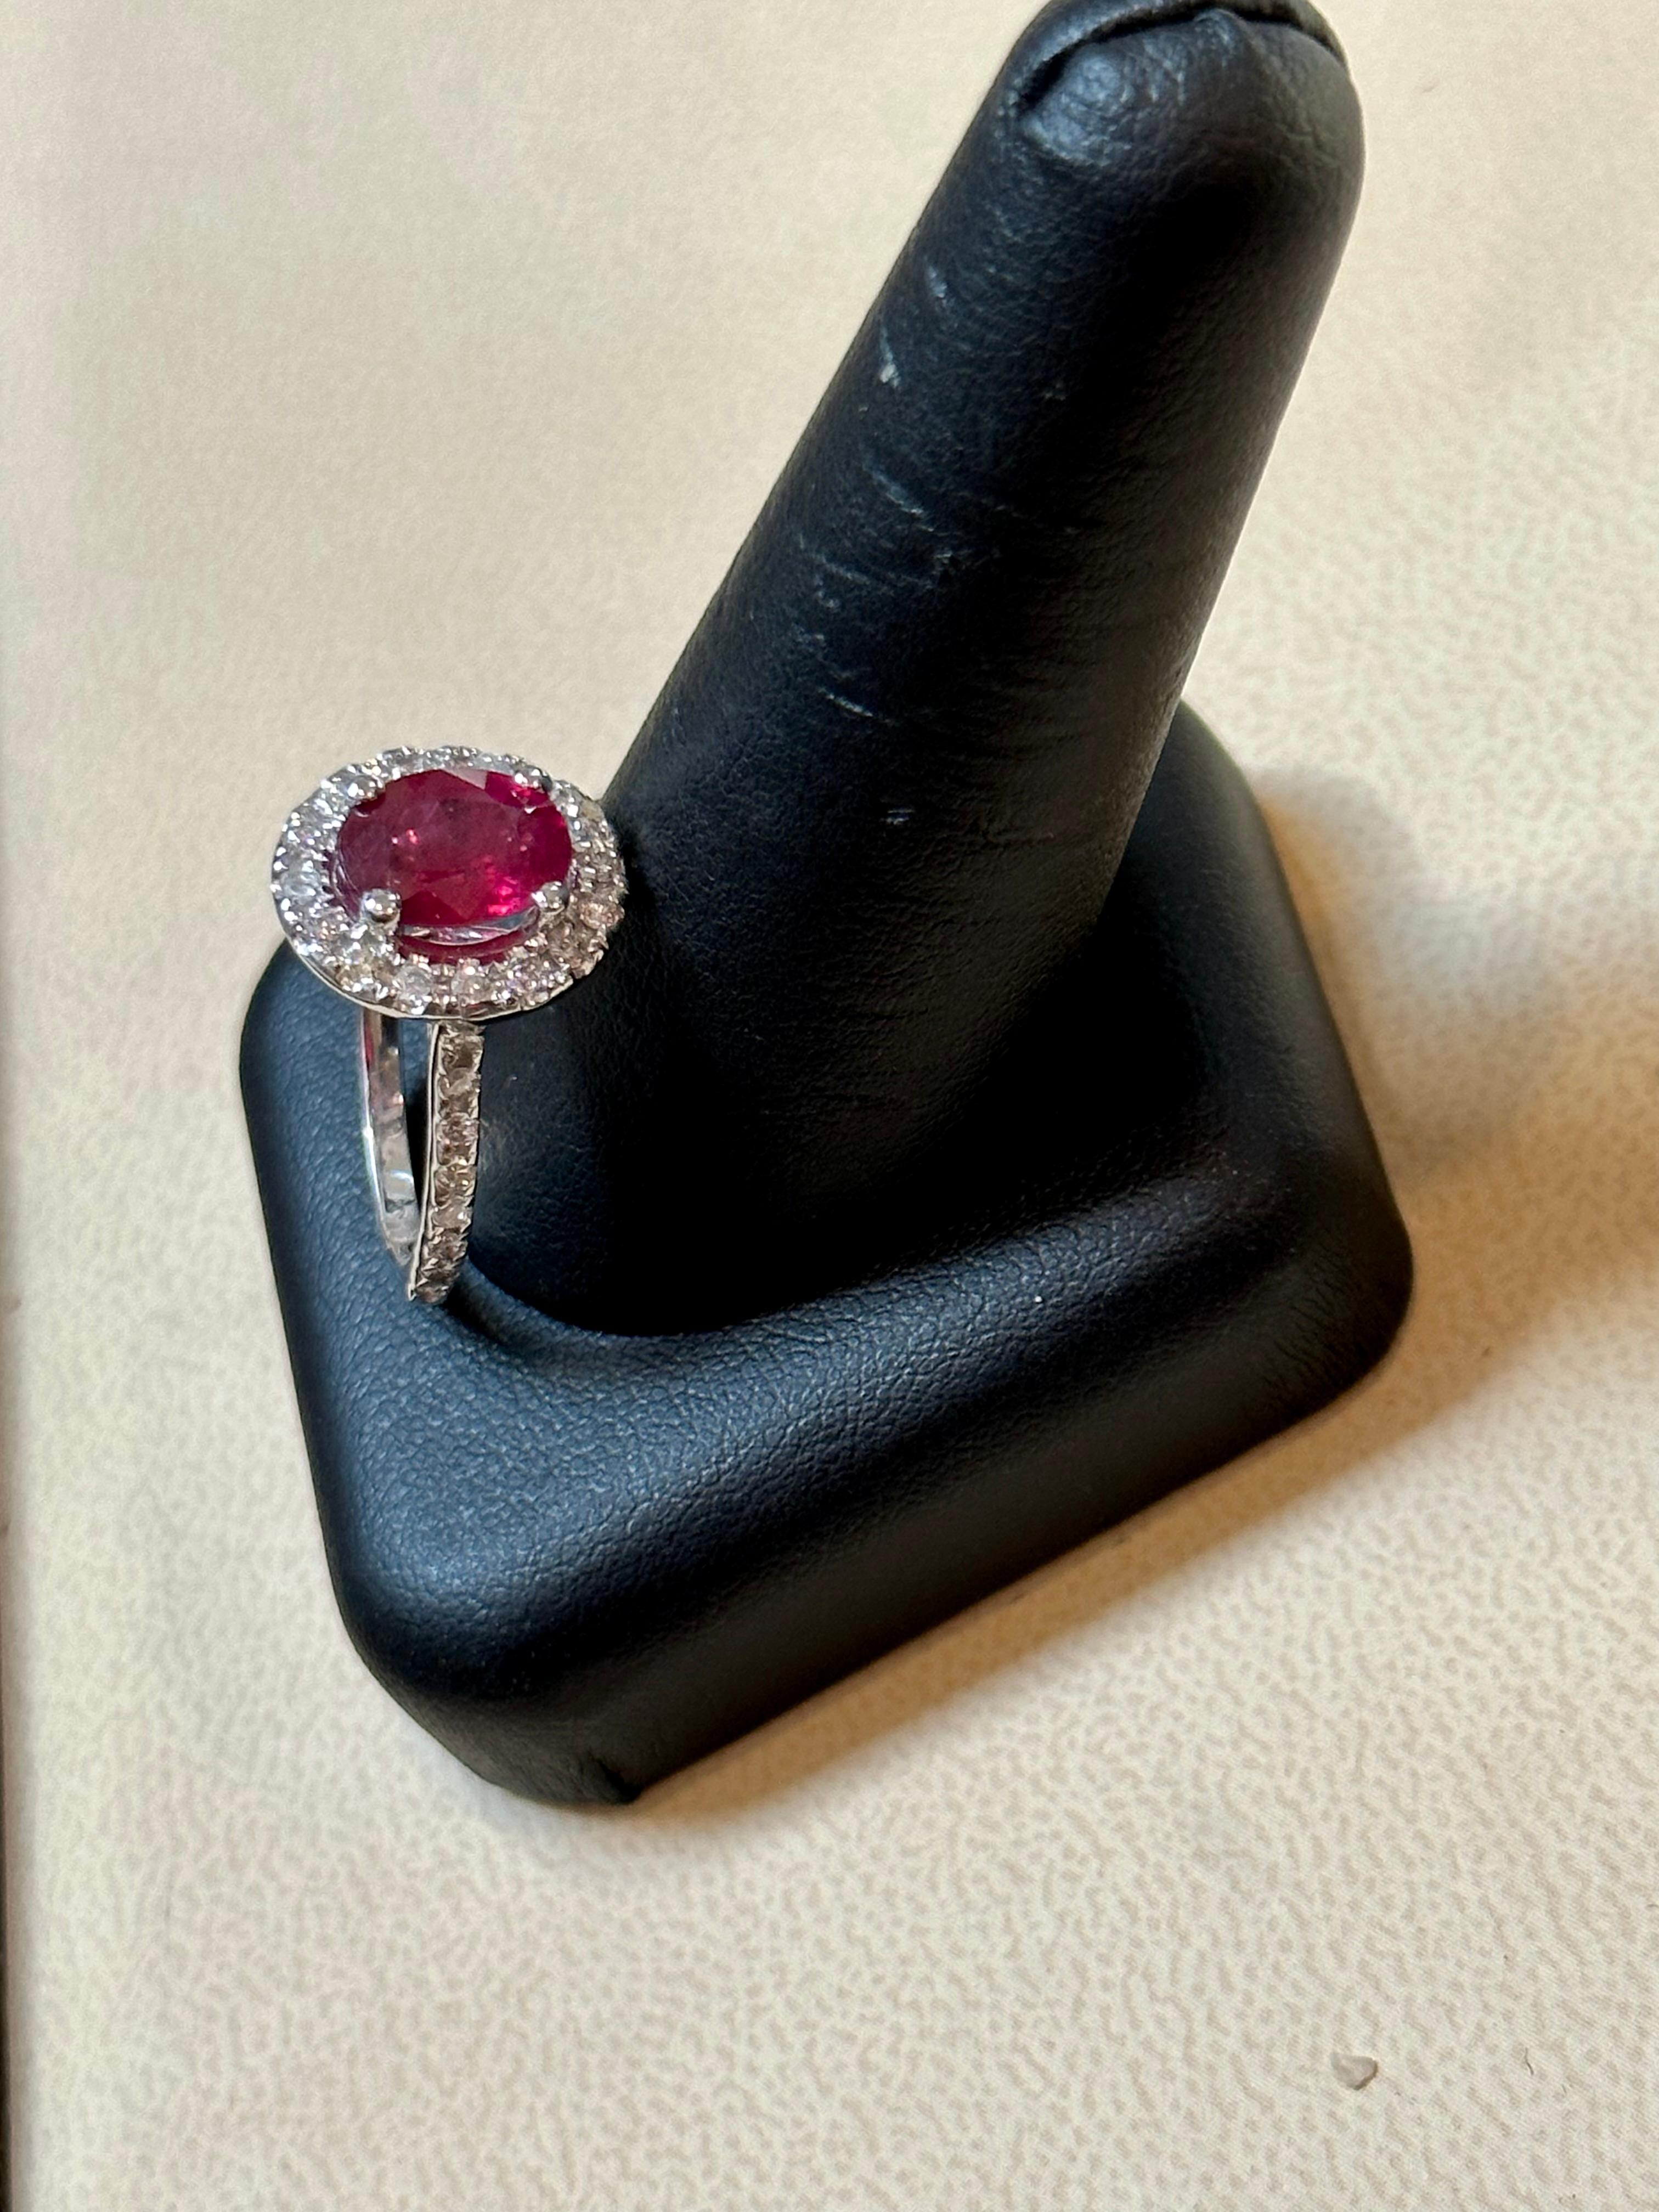 3 Carat Oval Treated Ruby & 1.25 ct Diamond Ring 14 Karat White Gold Size 6 For Sale 2